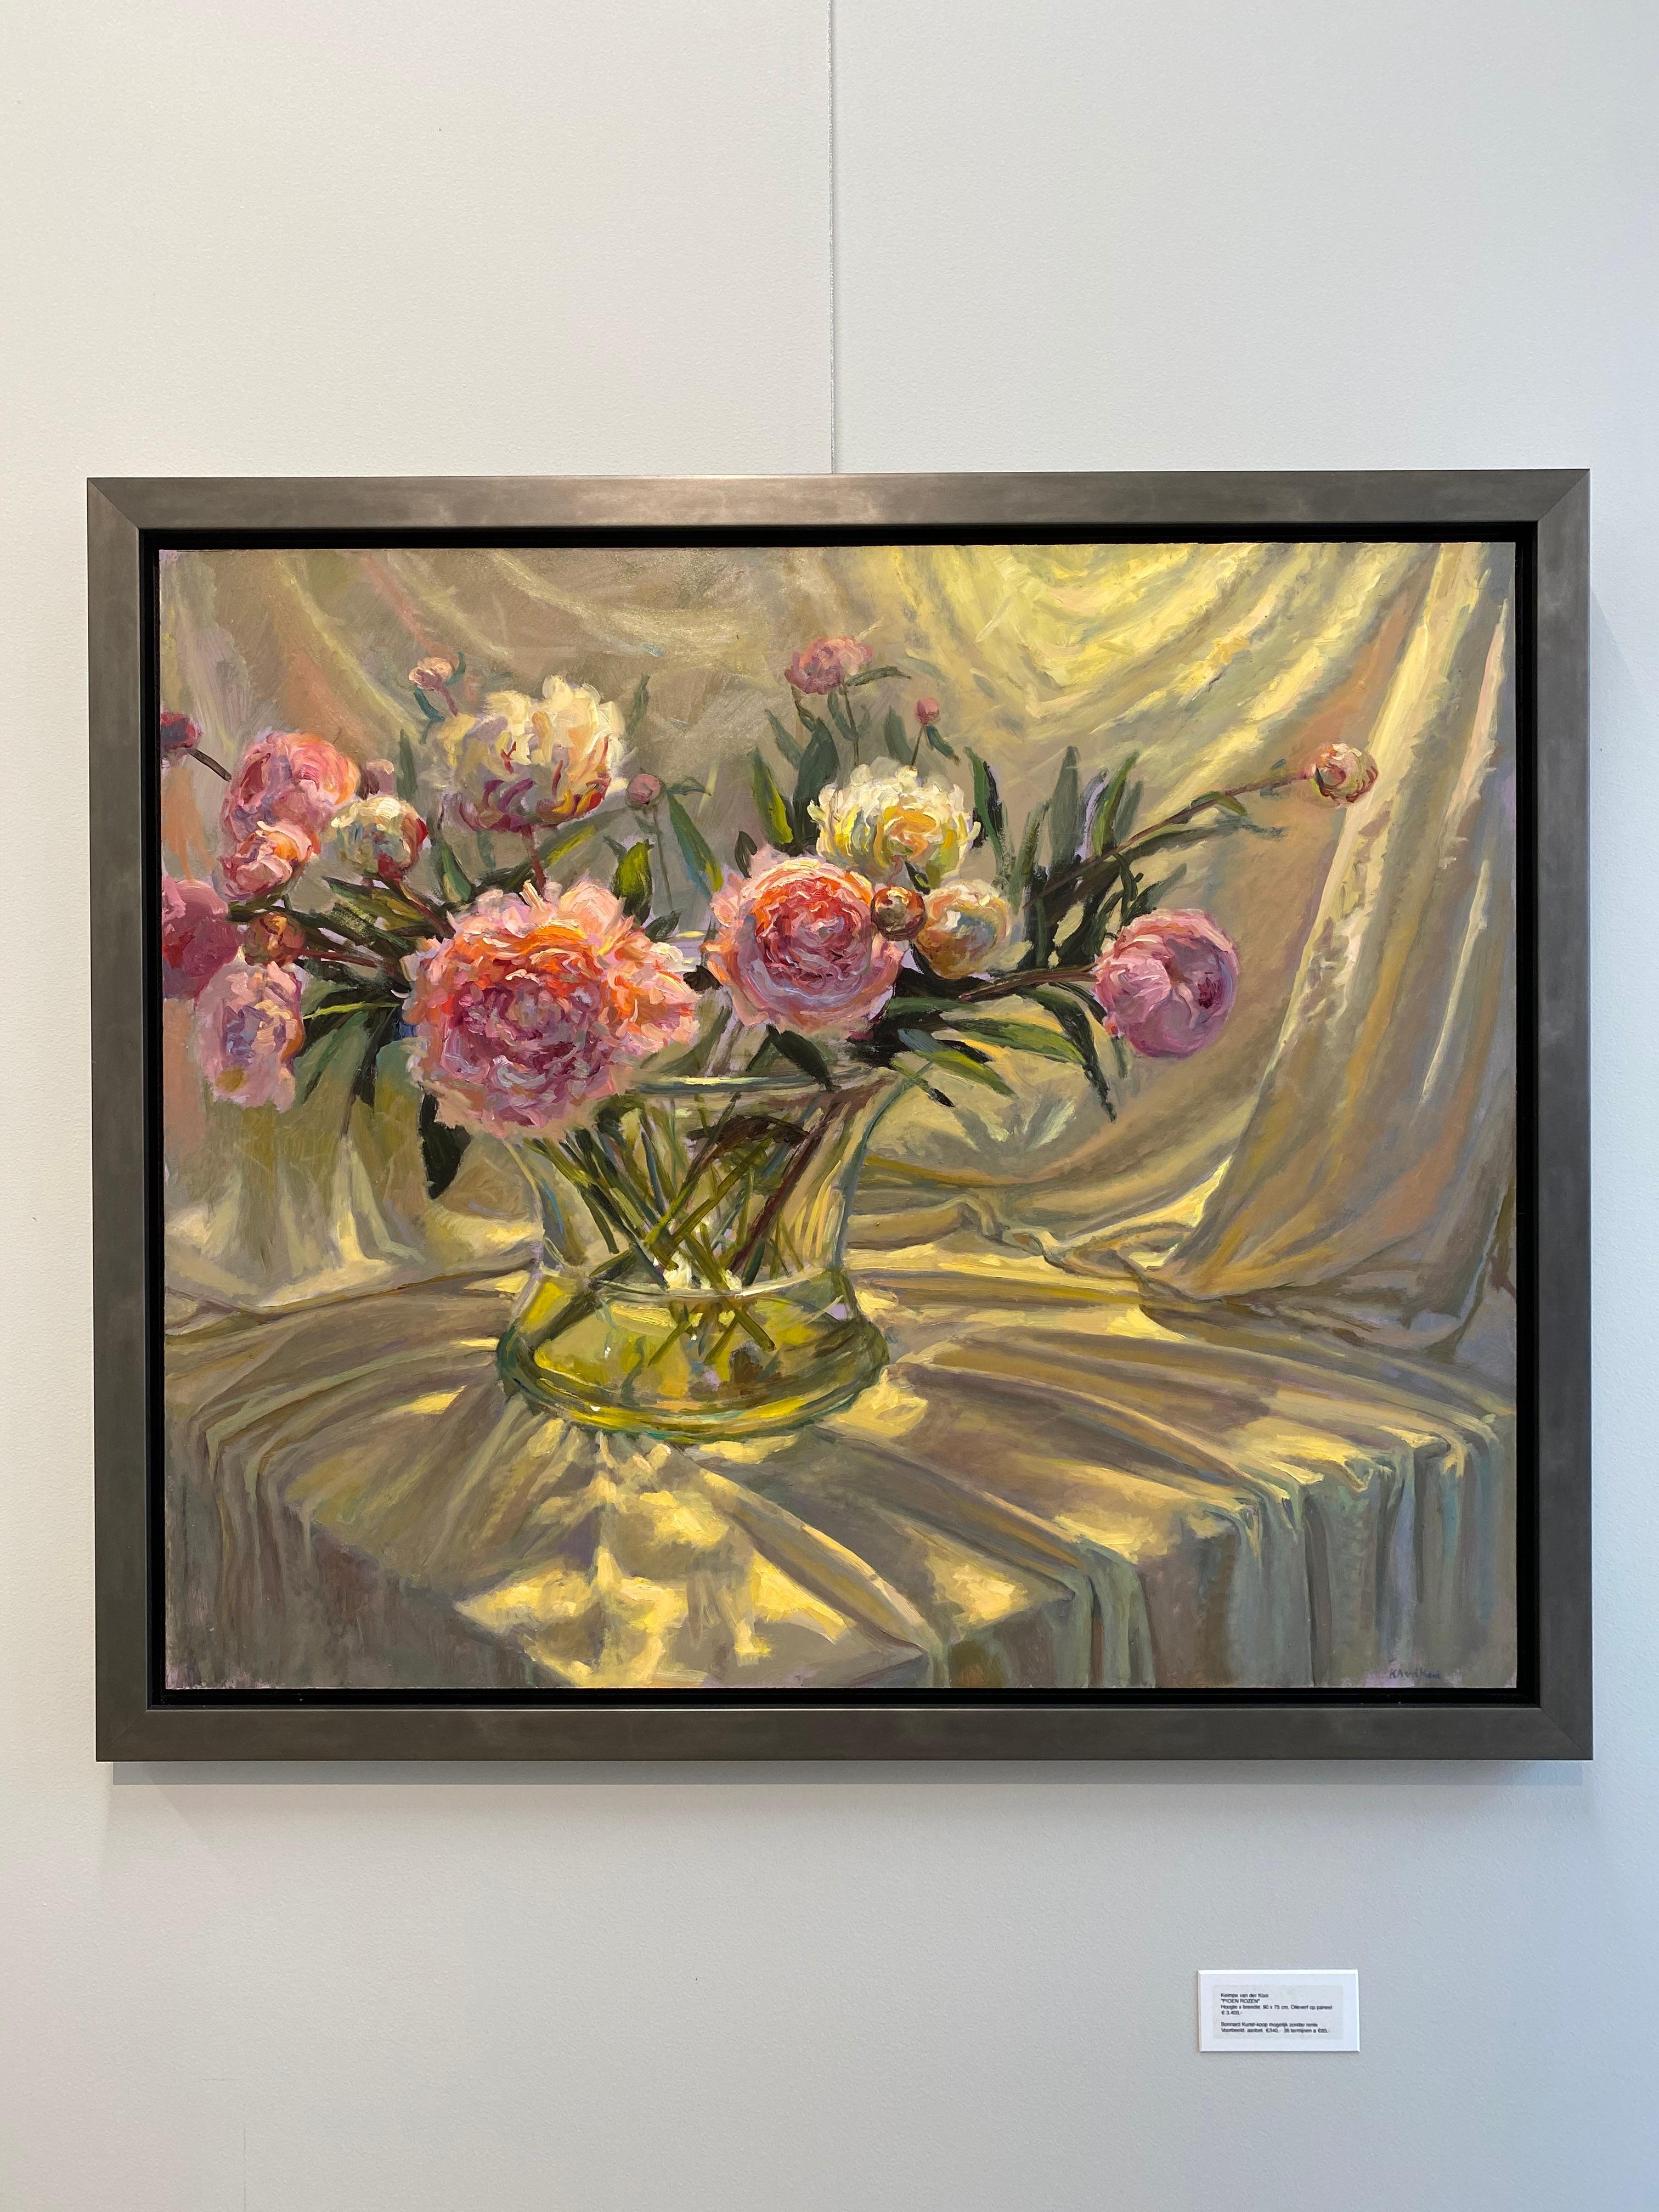 Peonies - 21st Century Colorful Impressionistic oil painting with flowers - Painting by Keimpe van der Kooi